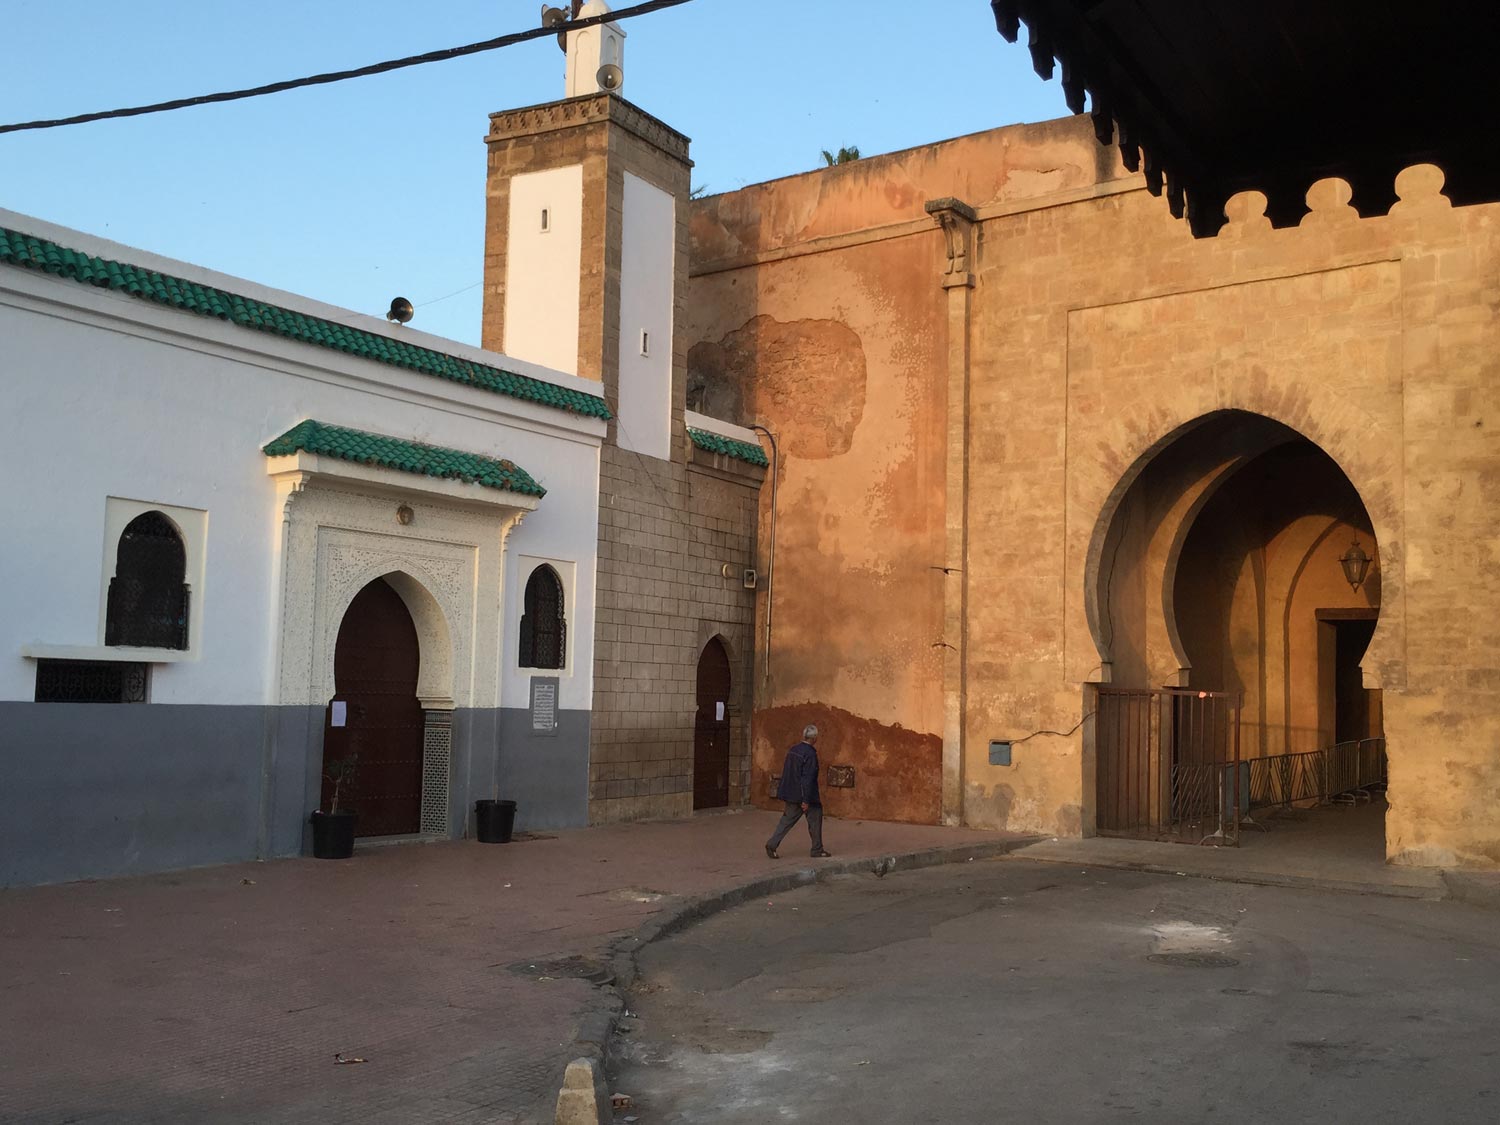 View from the interior of the gate with the mosque facade on the left